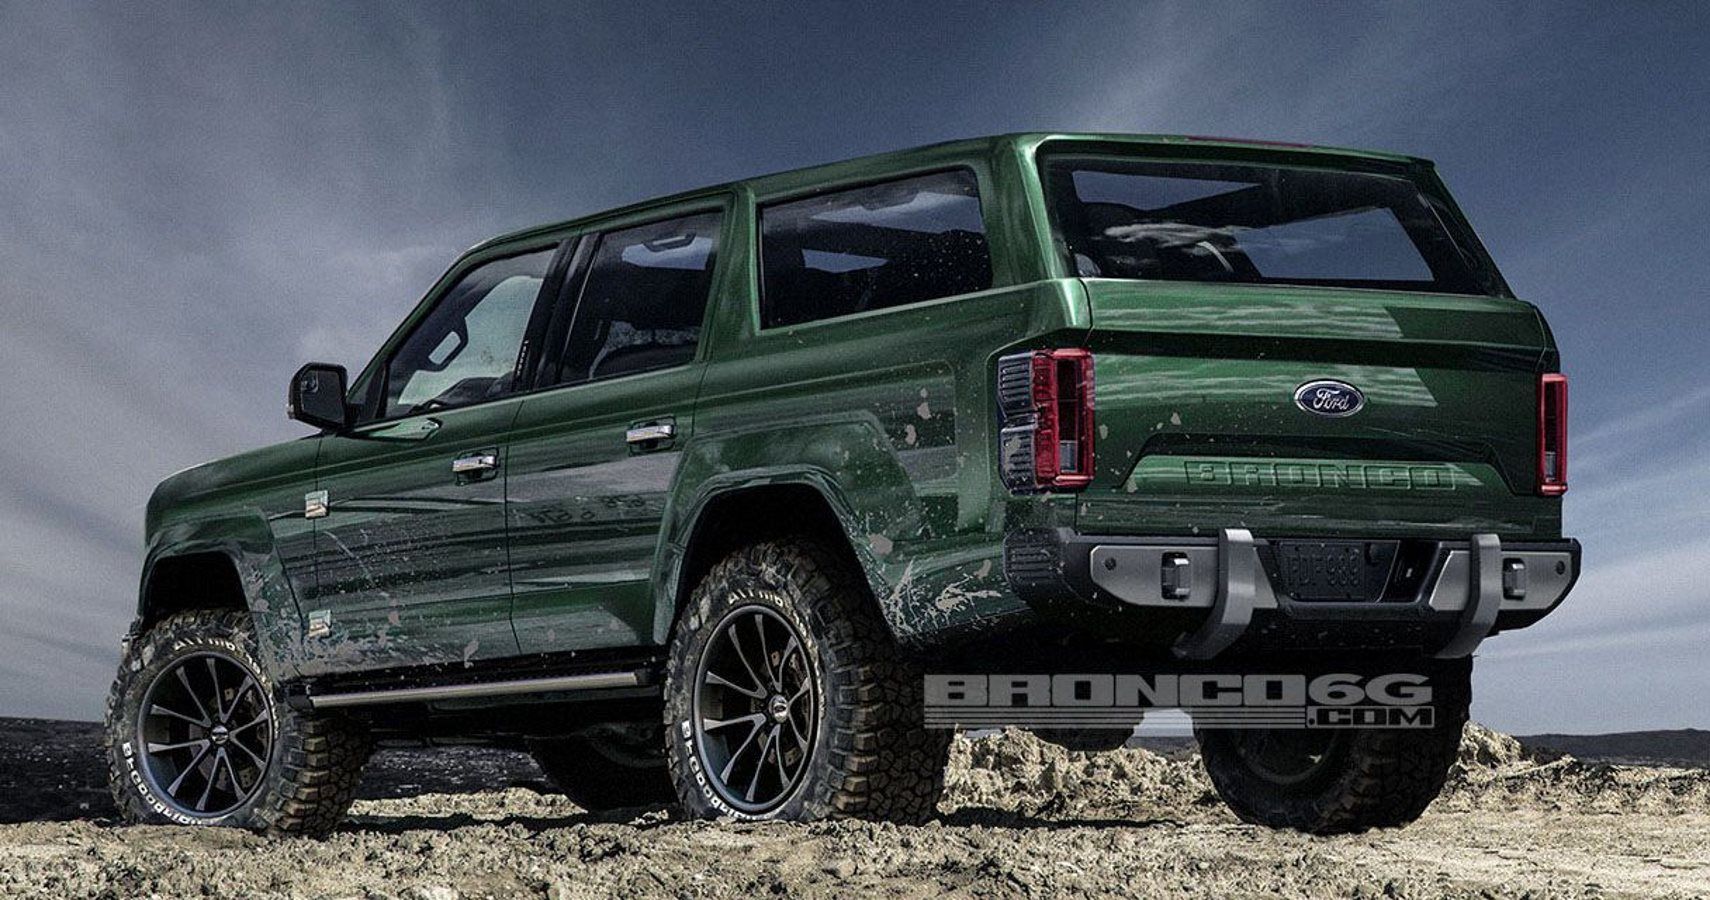 Confirmed: The 2020 Ford Bronco Will Have A Hybrid Option